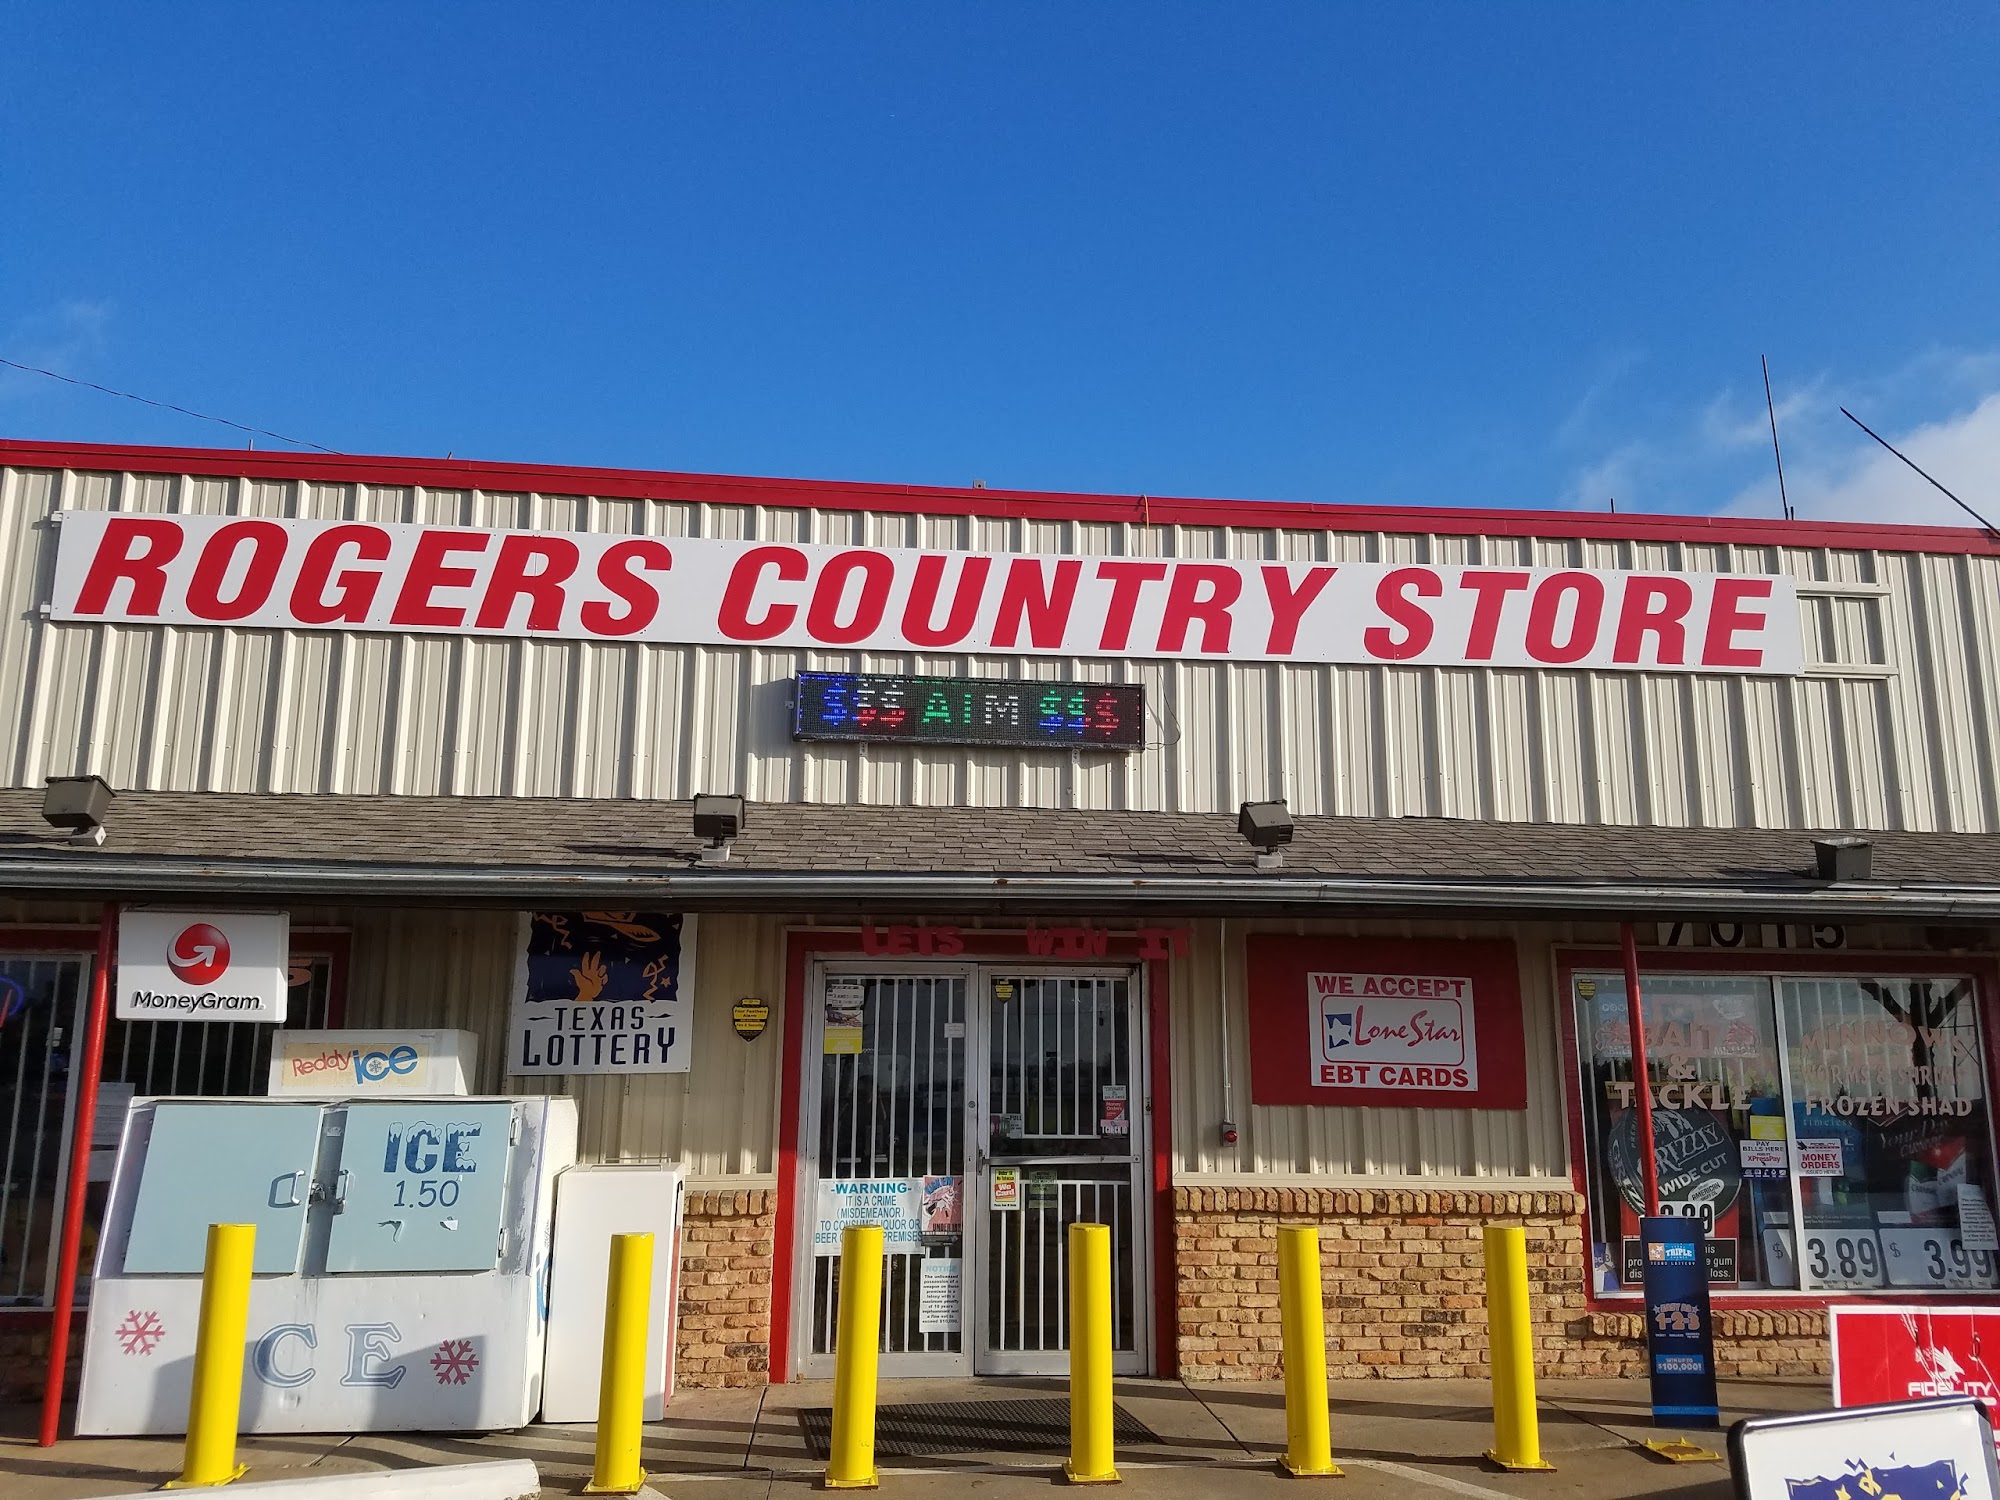 Roger's Country Store